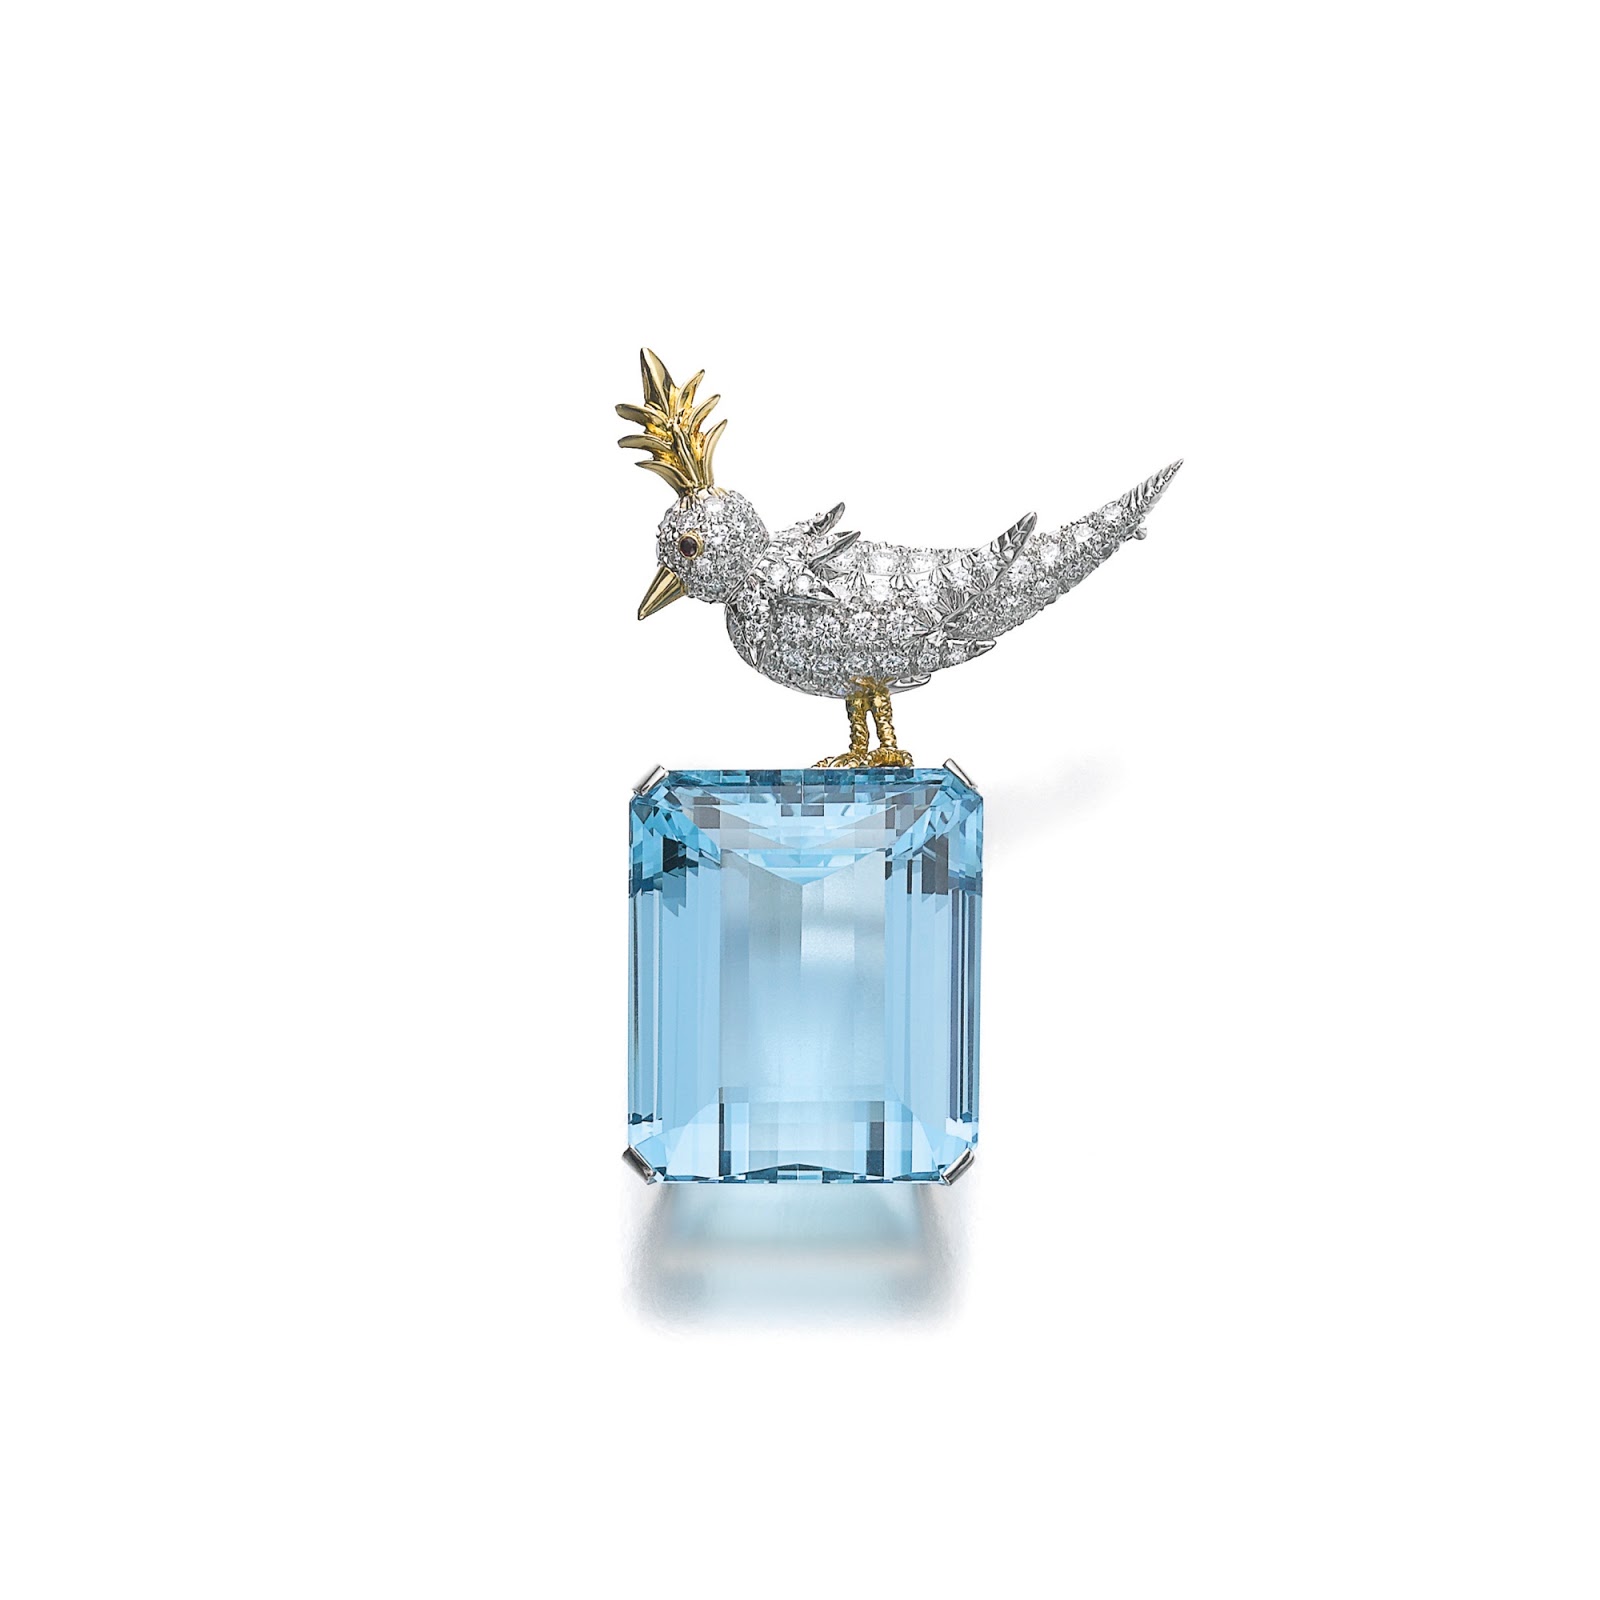 Bird on a Rock brooch with aquamarine and diamonds, by Jean Schlumberger for Tiffany